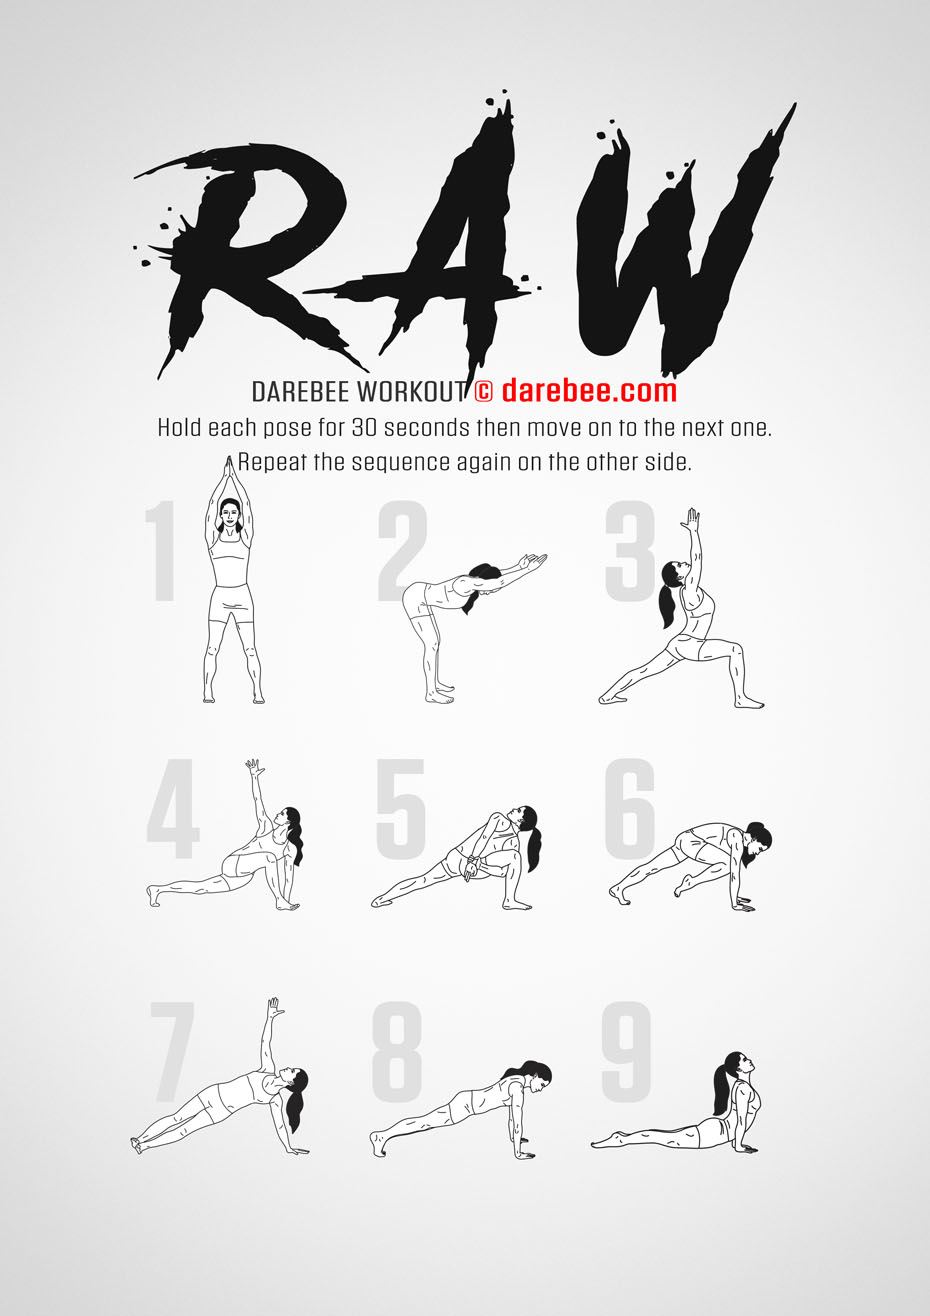 RAW is a Darebee home-fitness yoga-based tendon strength and flexibility workout.